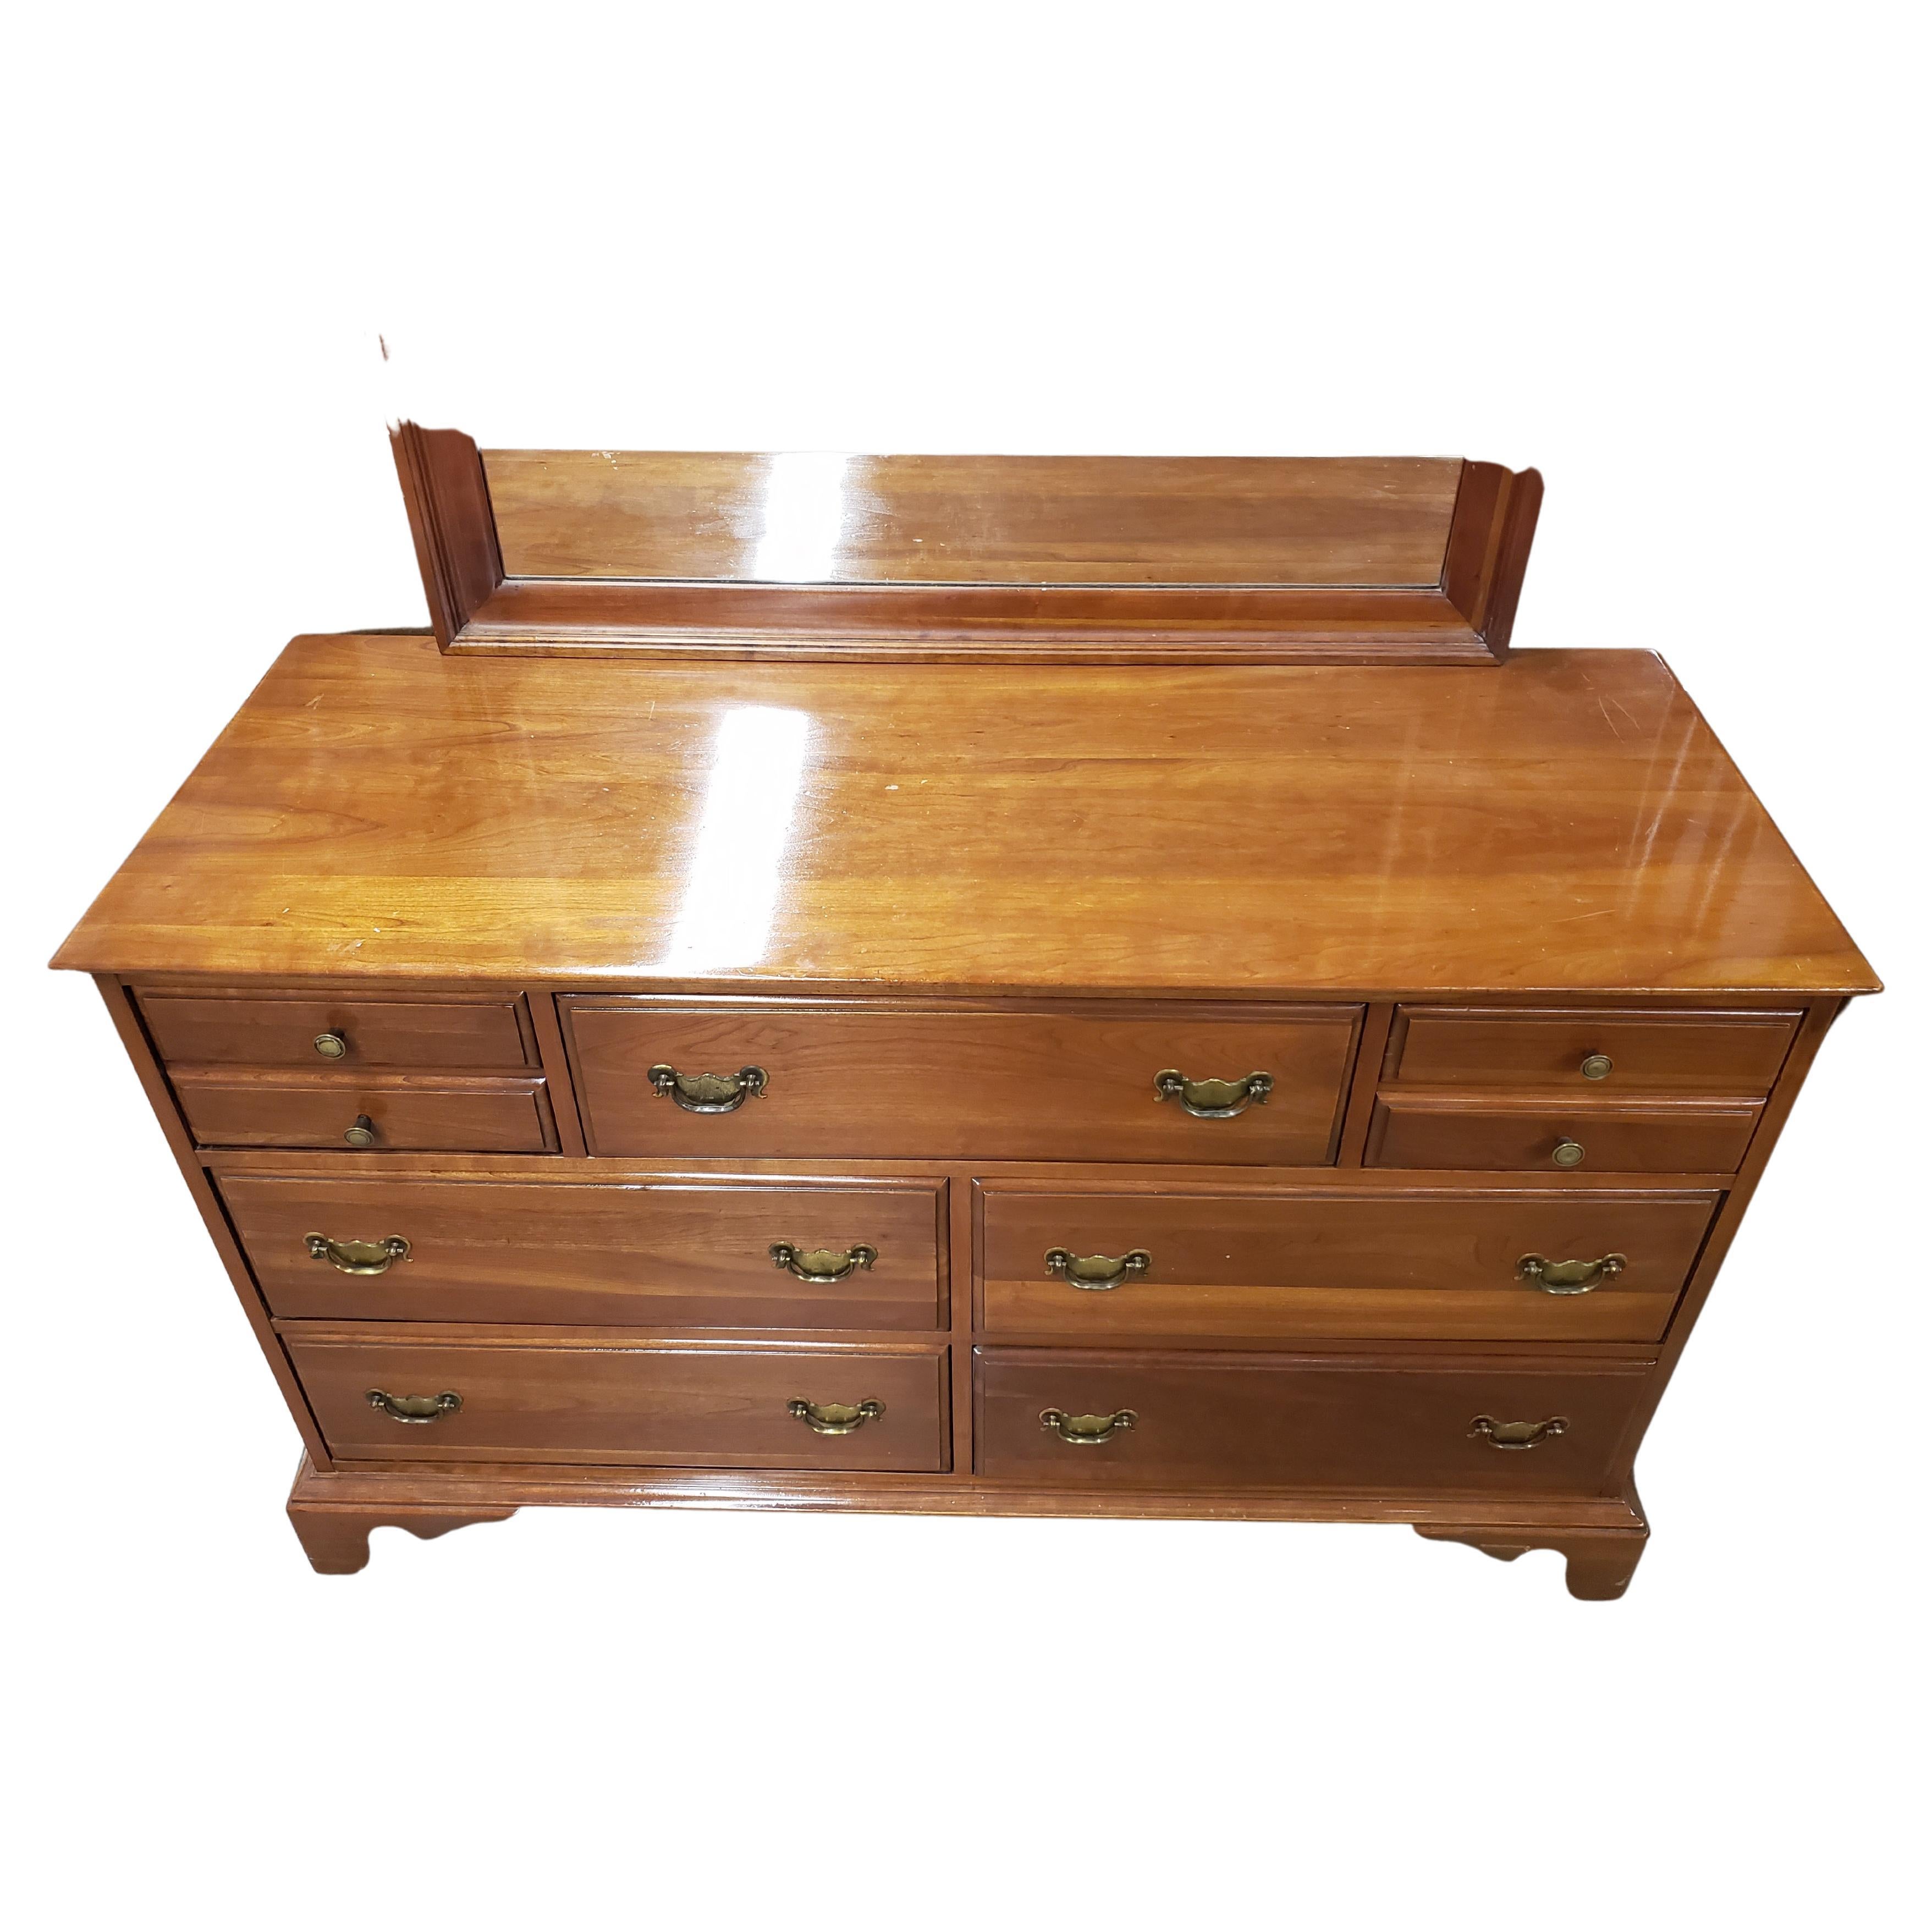 Unique mid-century Chippendale double dresser by Unique Furniture Makers in very good vintage condition. Dresser has been profesionally refinished in recent years.
Measures 53.5 inches in width, 20 inches in depth and stands 33.5 inches tall